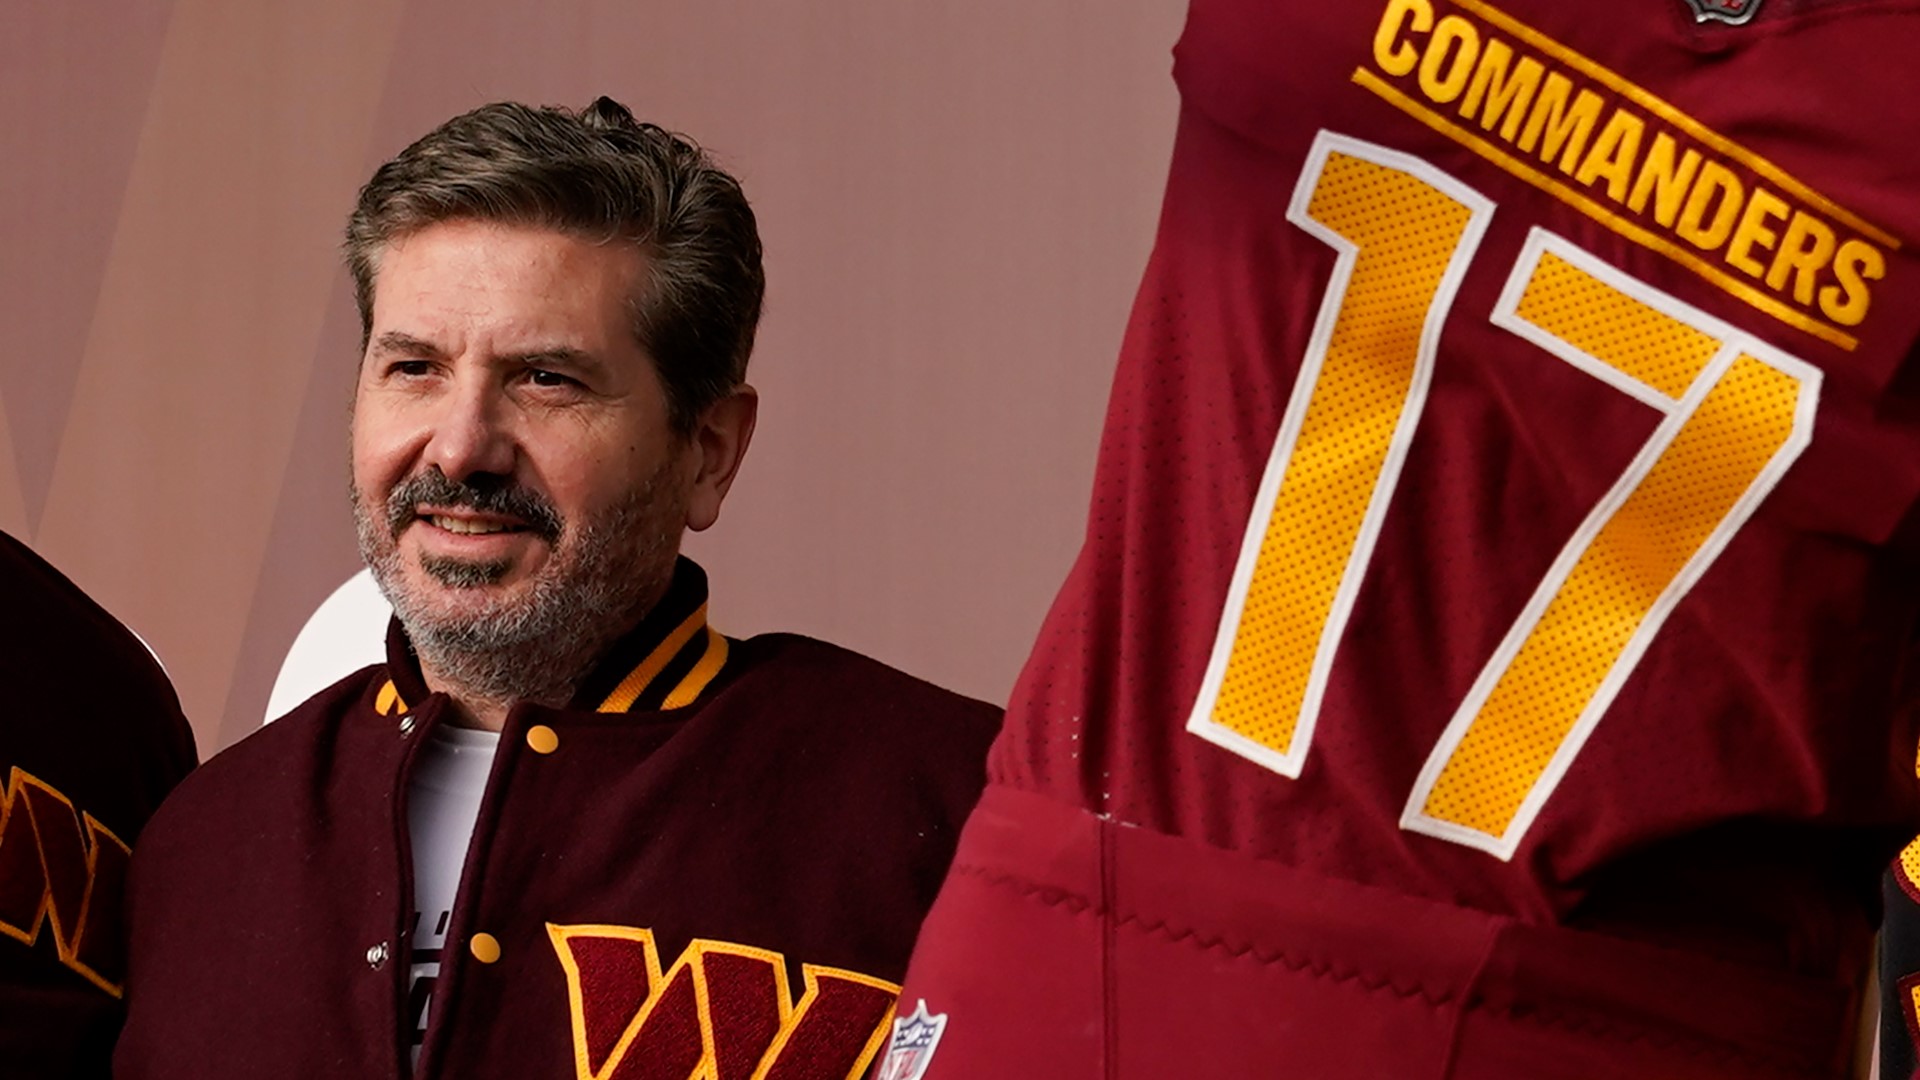 New allegations tonight surrounding the federal investigation into Washington Commanders owner Dan Snyder.